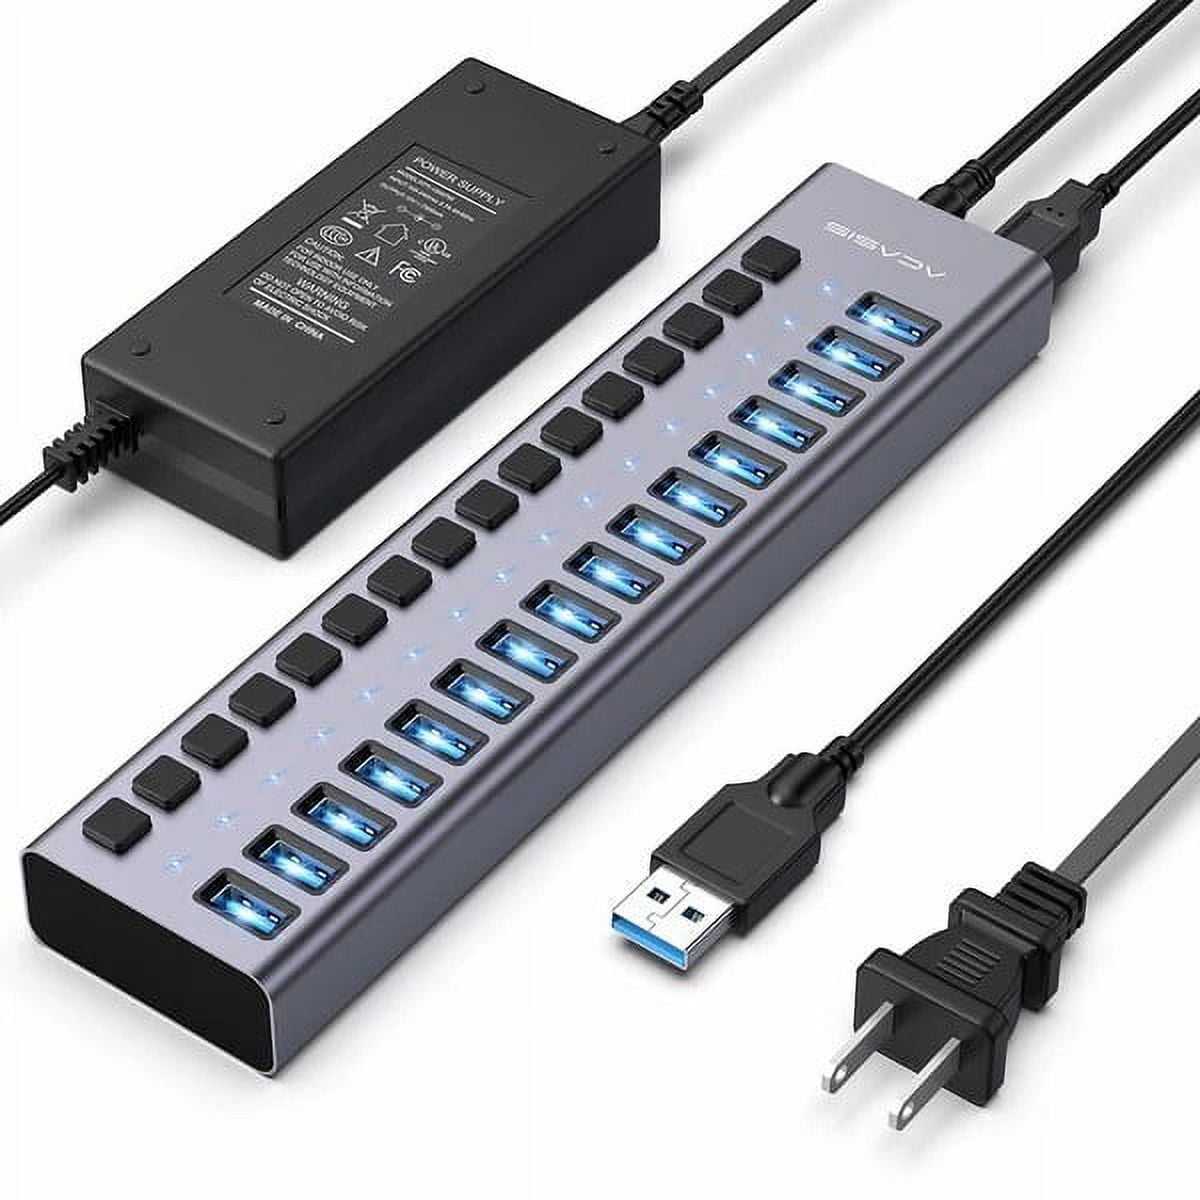 Powered USB Hub, 8-Port USB Hub 3.0 with SD/TF Card Readers, USB 3.0 Port  Hub with Individual On/Off Switches and 5V/4A Power Adapter, USB C Hub